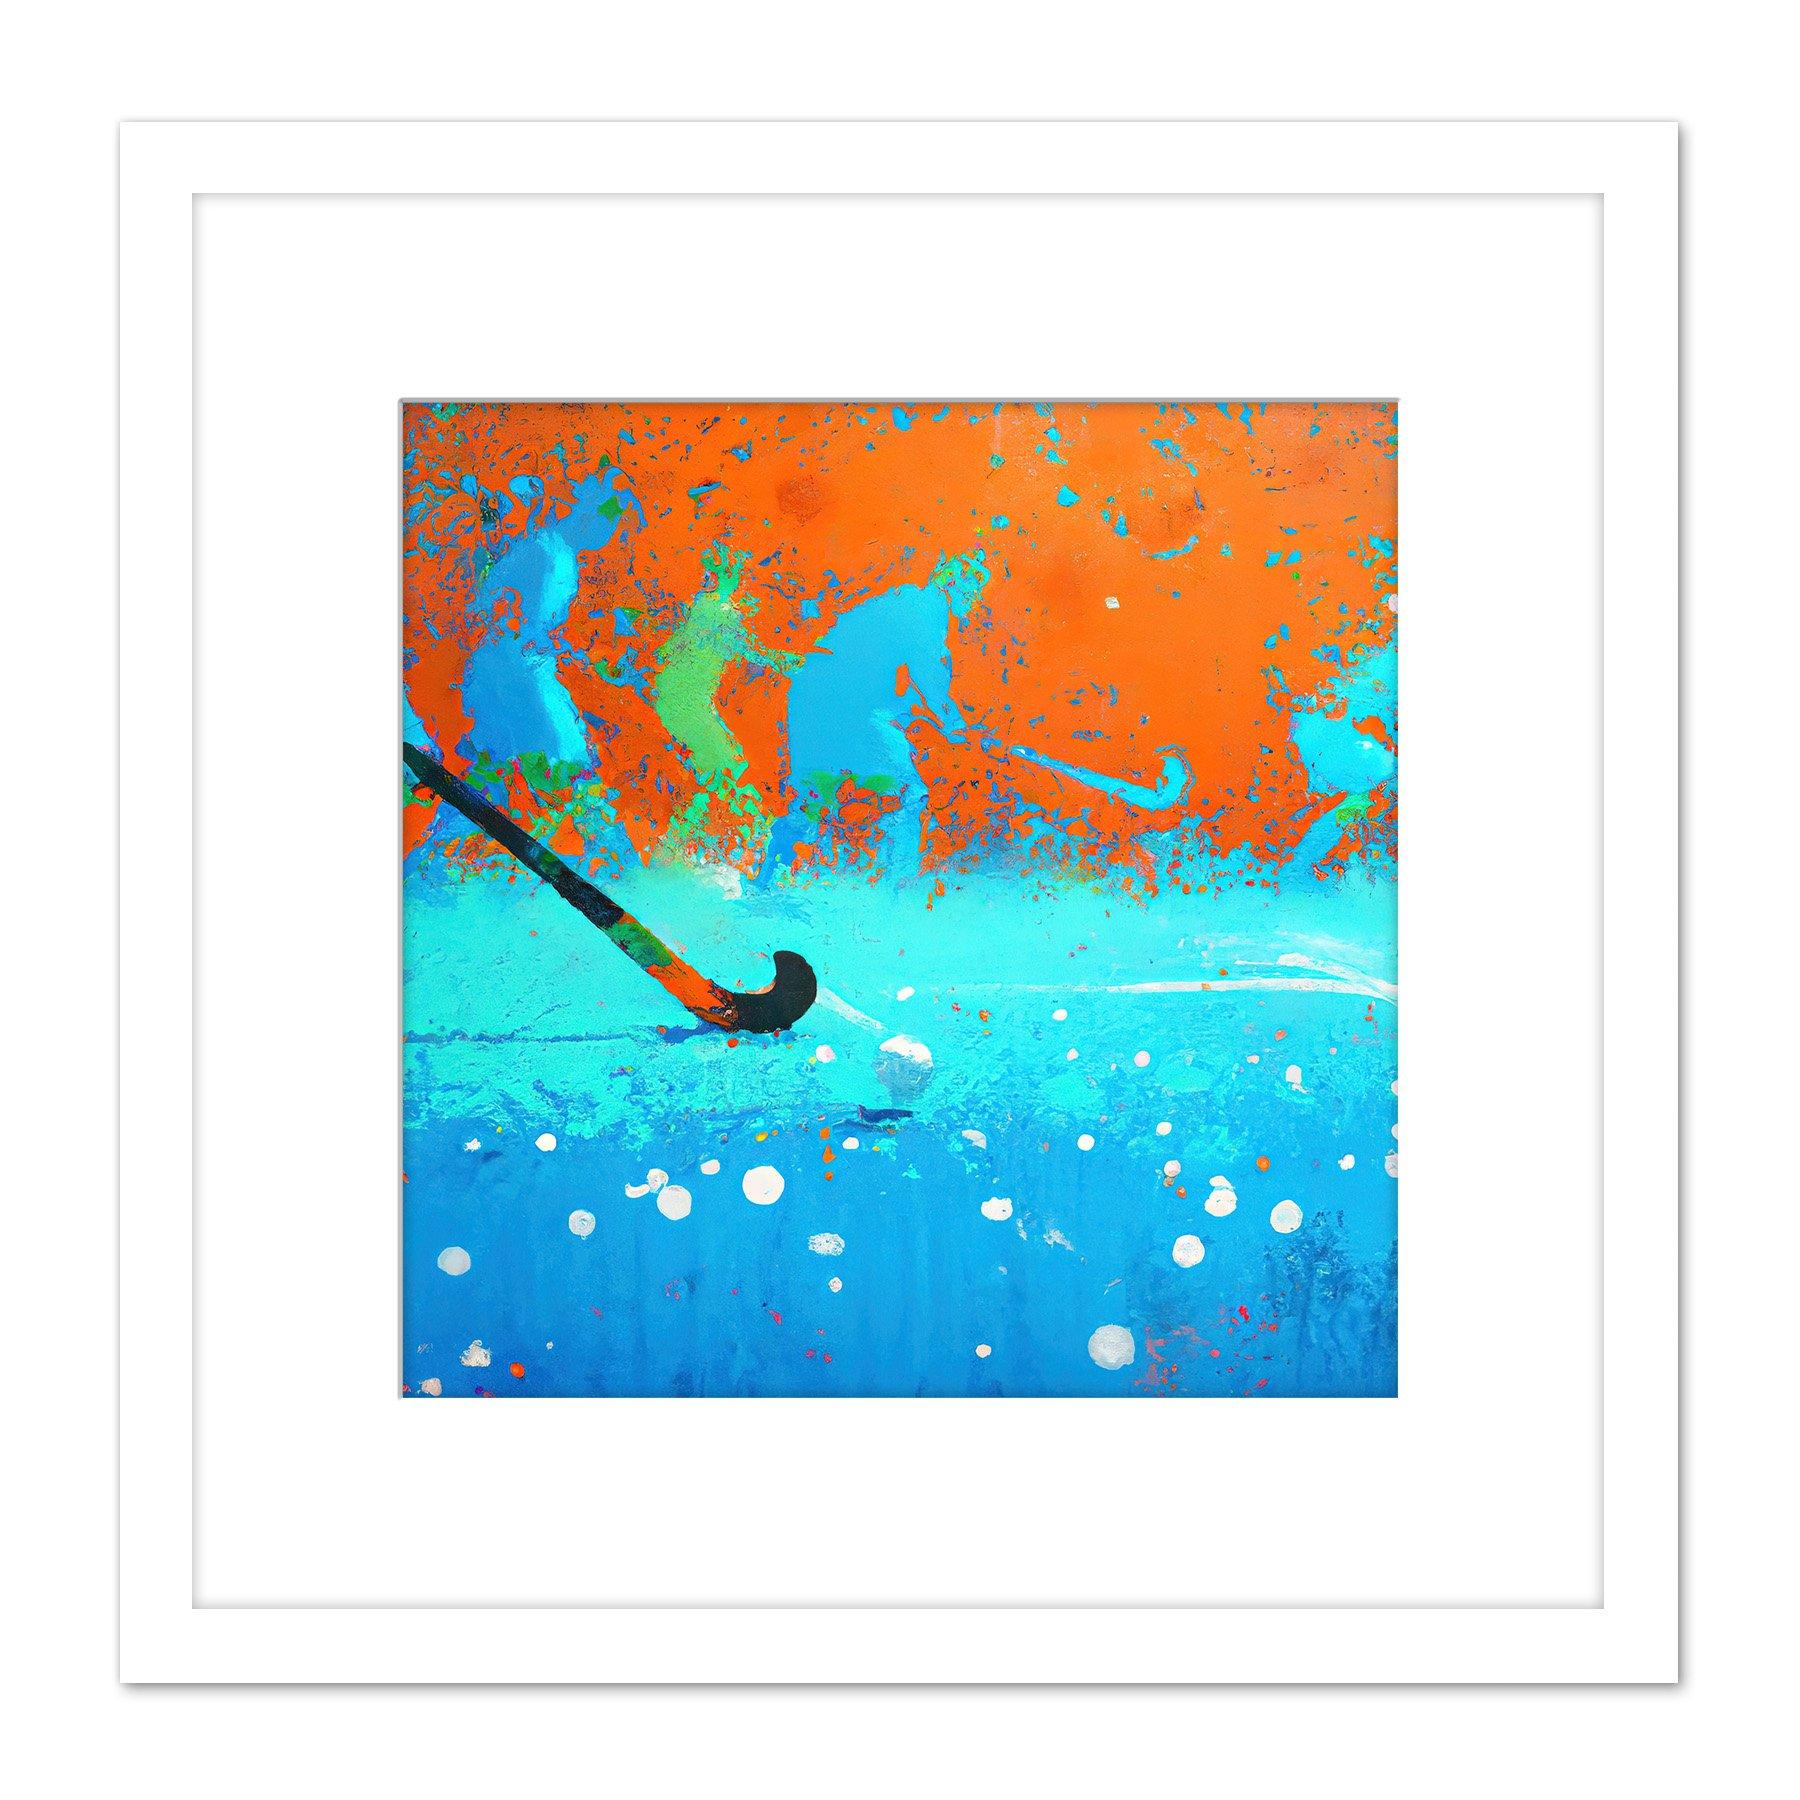 Abstract Field Hockey Stick Players Pitch Blue Orange Sport Oil Painting Square Wooden Framed Wall Art Print Picture 8X8 Inch